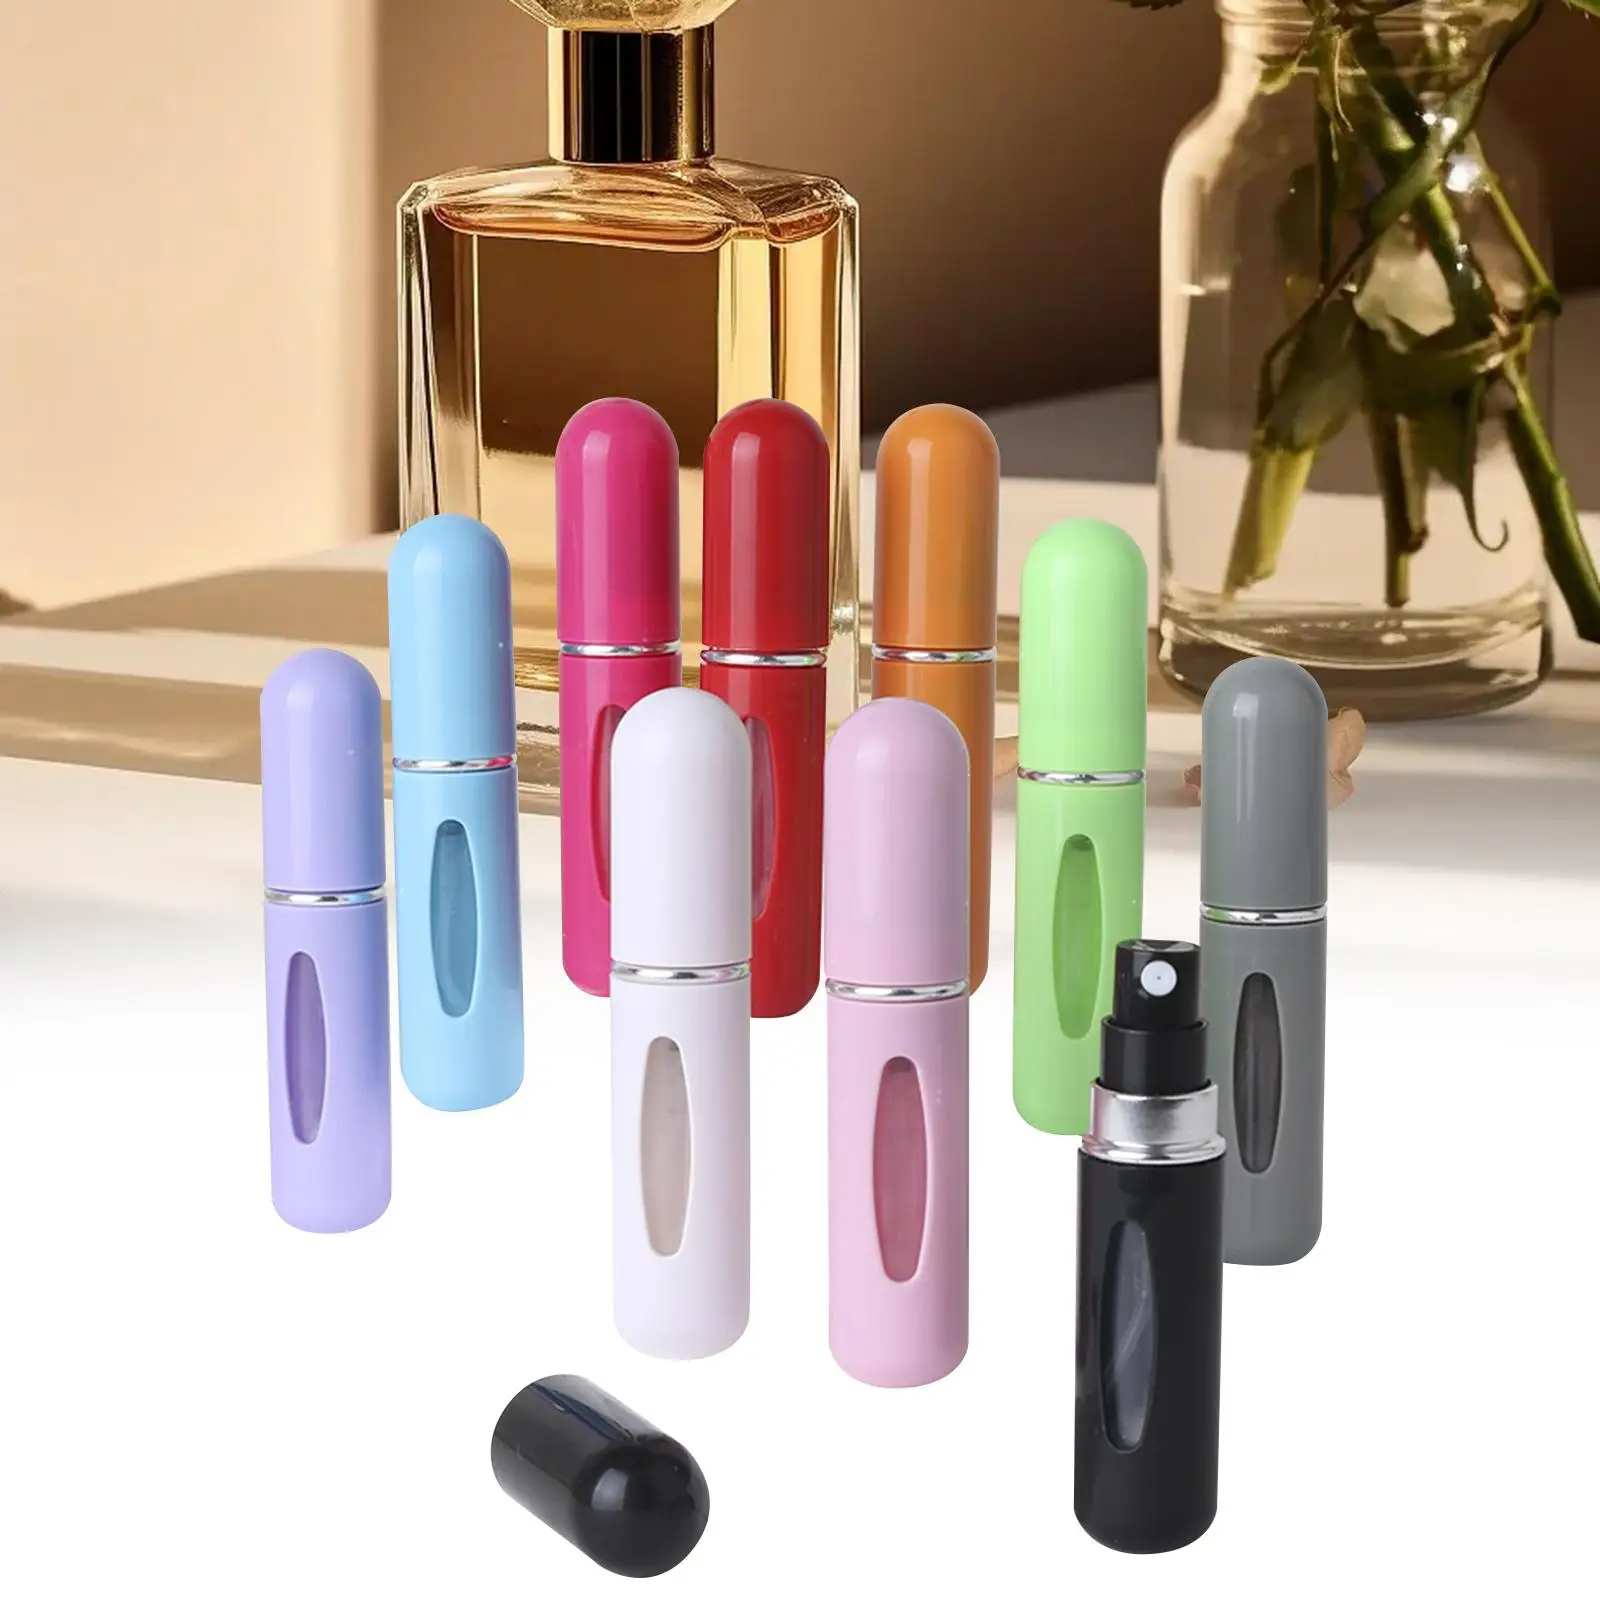 10Pcs 5ml Refillable Perfume Bottle Resuable Mist Sprayer for Foundation Cologne Aftershave Cosmetic Cream Lotion Makeup Remover